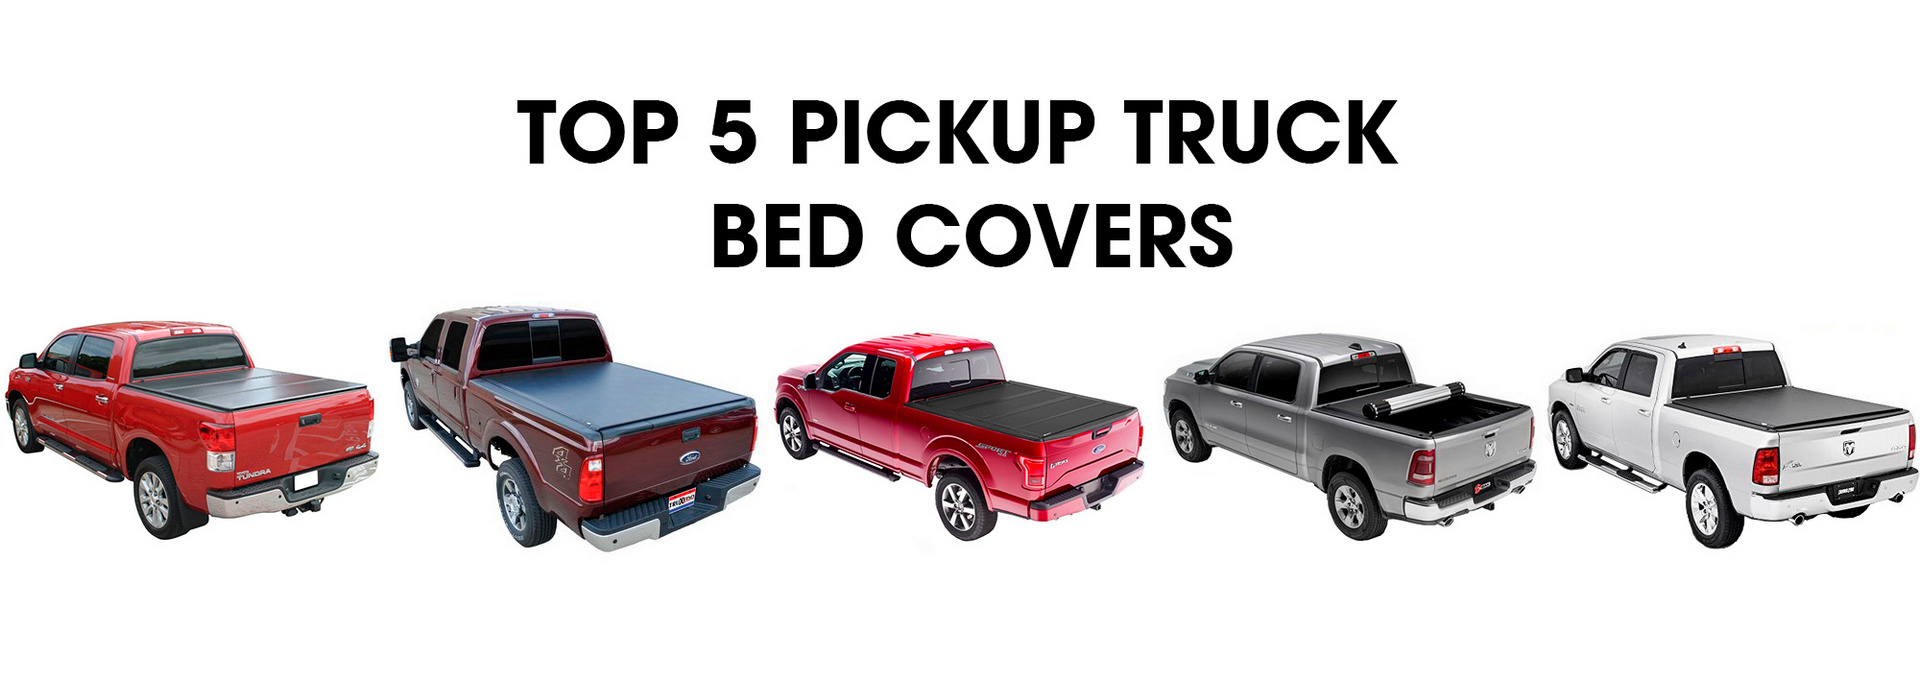 Pickup Truck Bed Covers — The Best Options for 2020